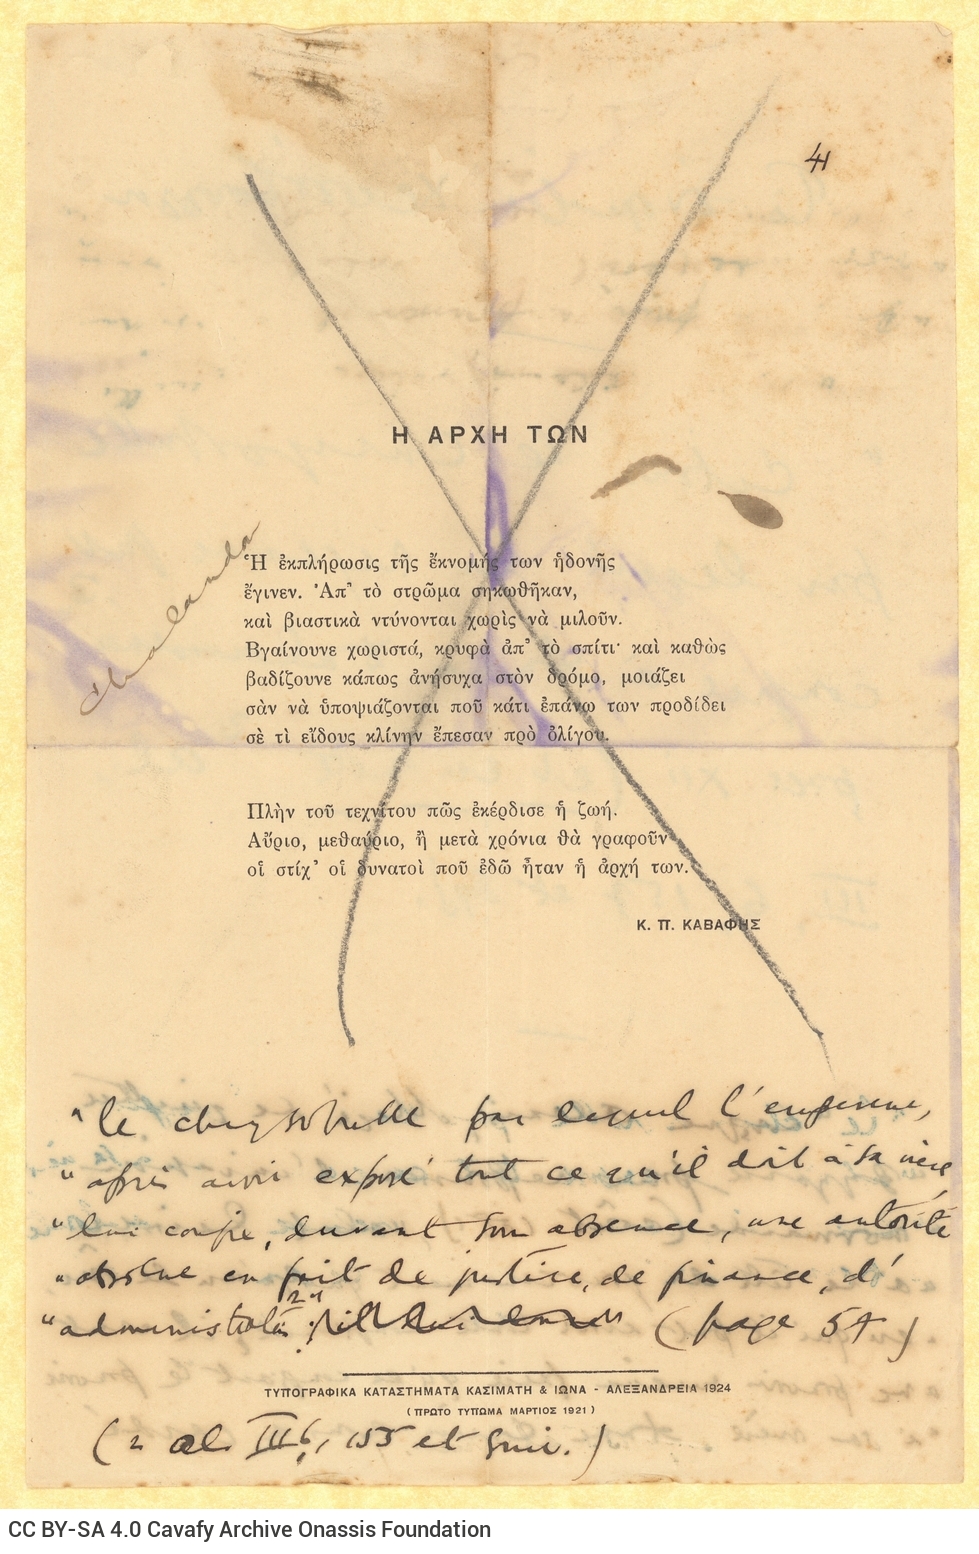 Handwritten notes on both sides of a broadsheet with the crossed out poem "Their Beginning". The broadsheet was printed in